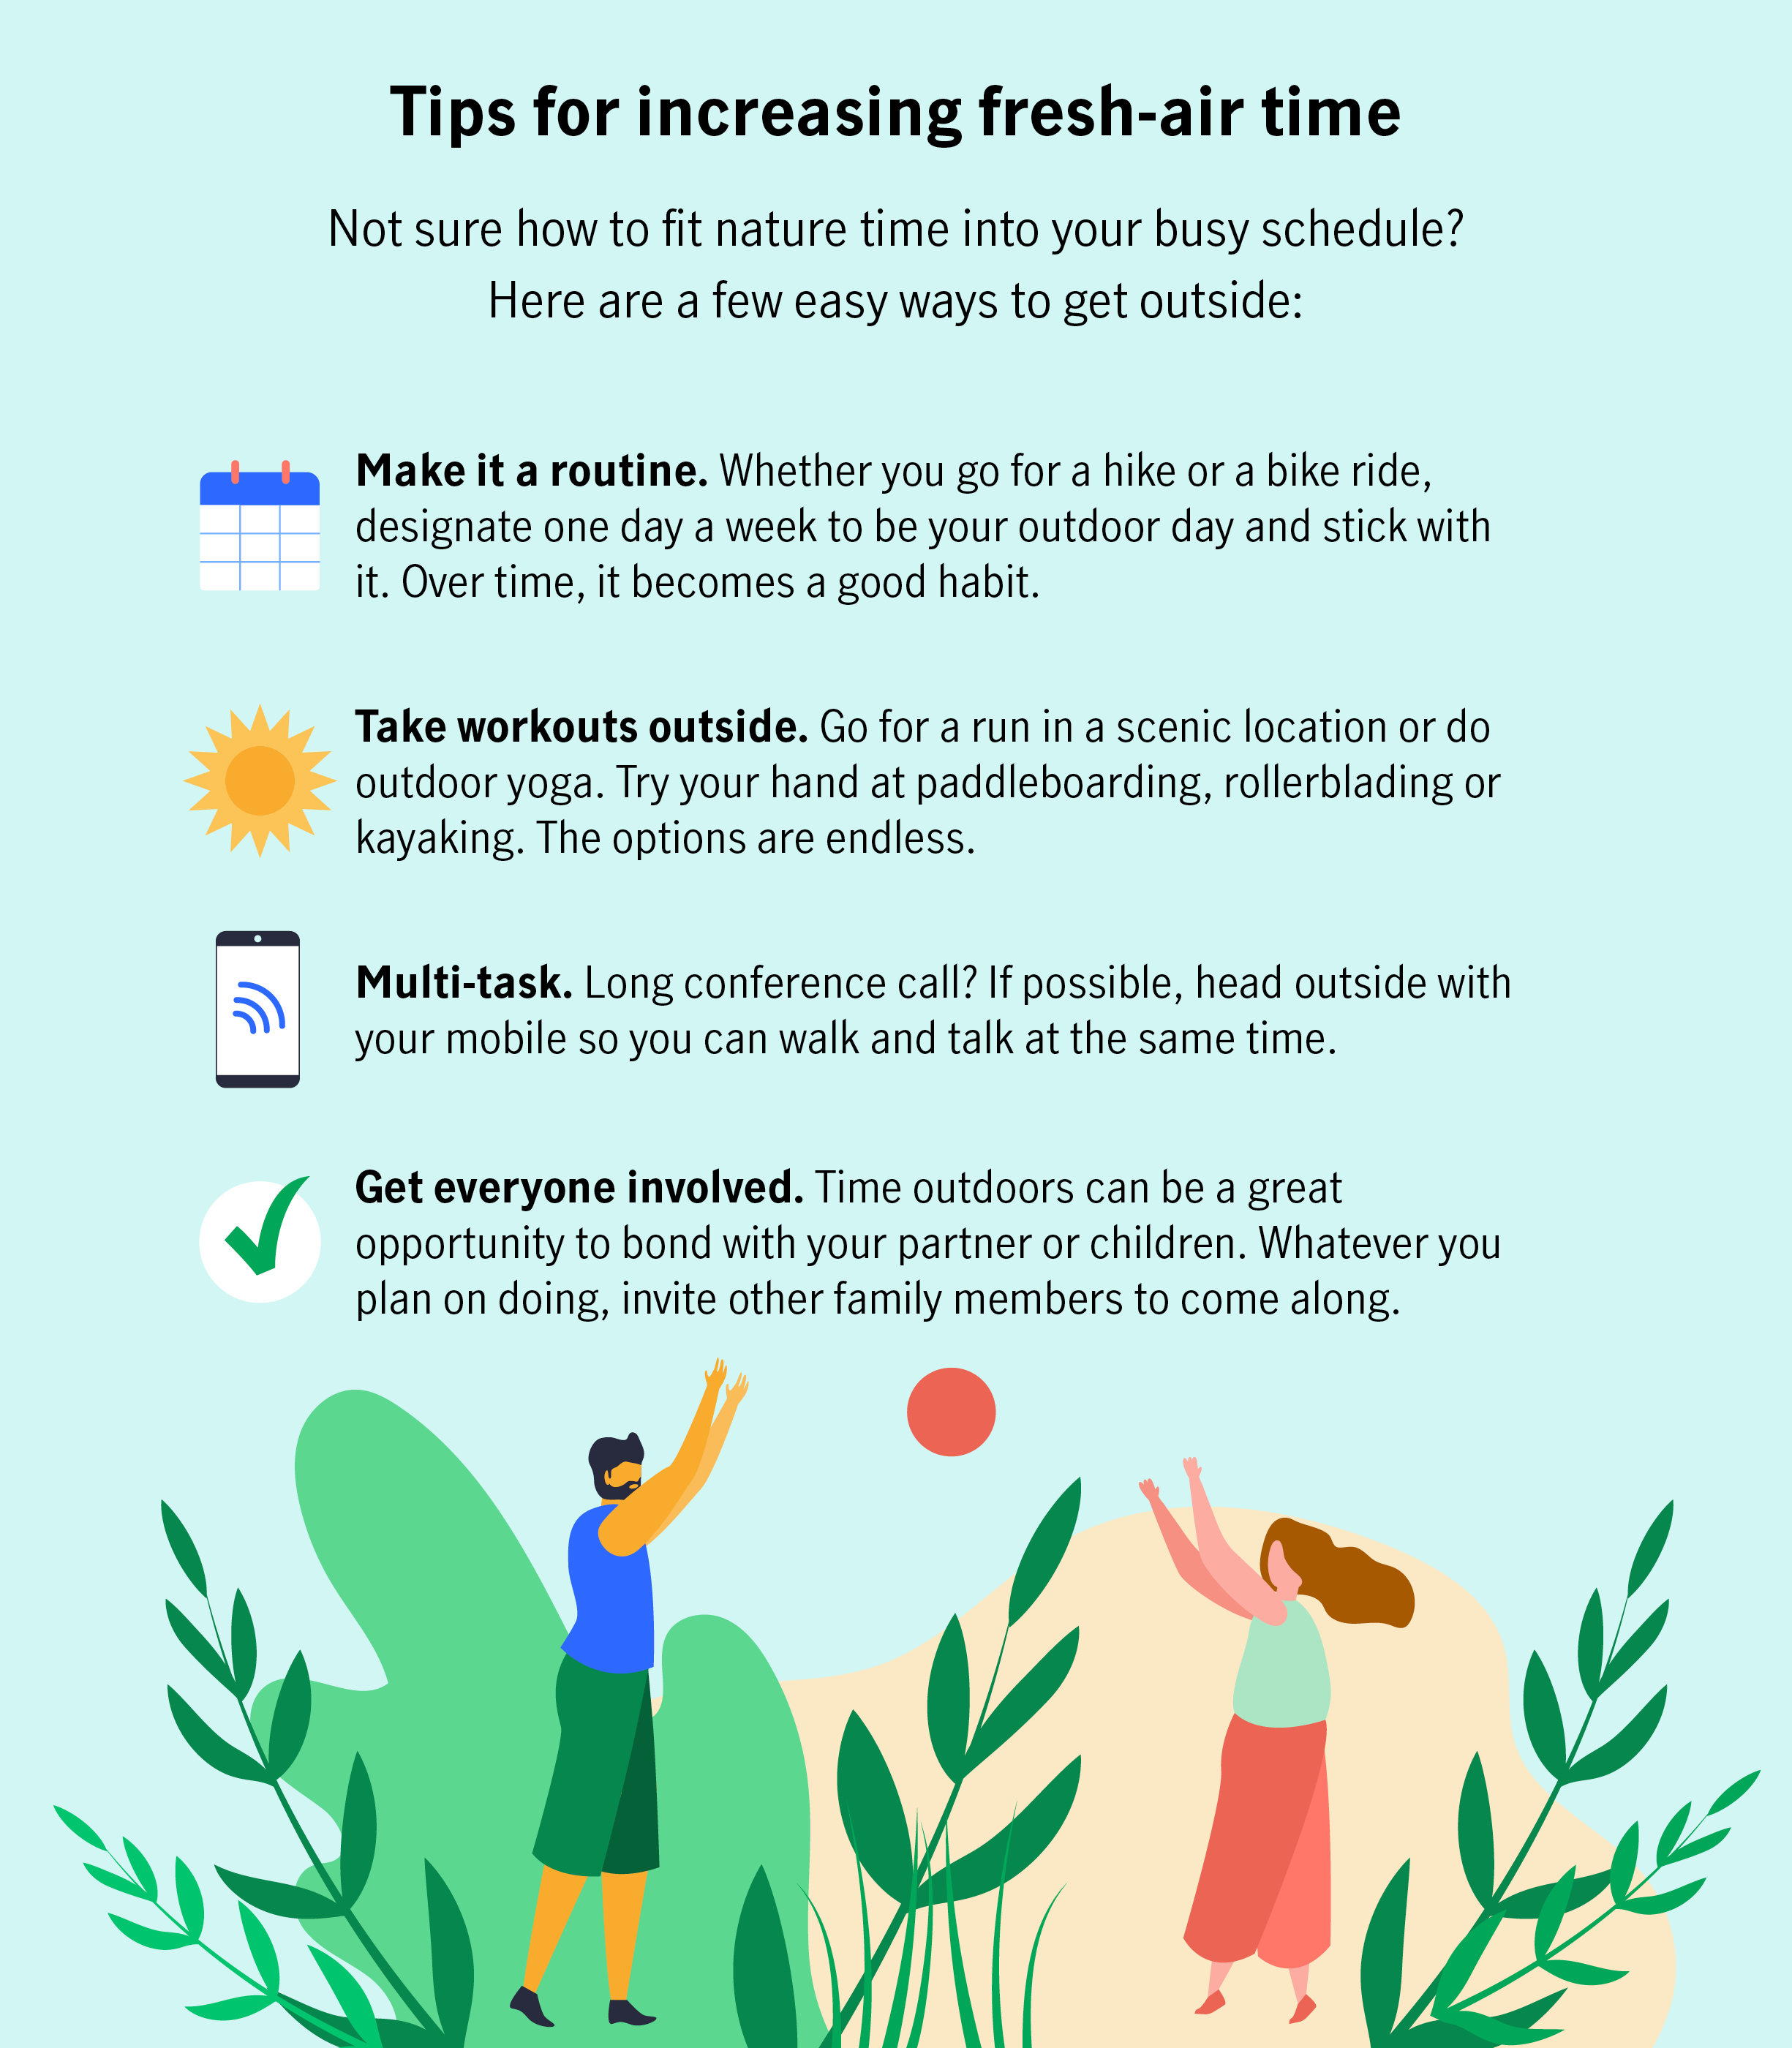 Tips for increasing fresh-air time